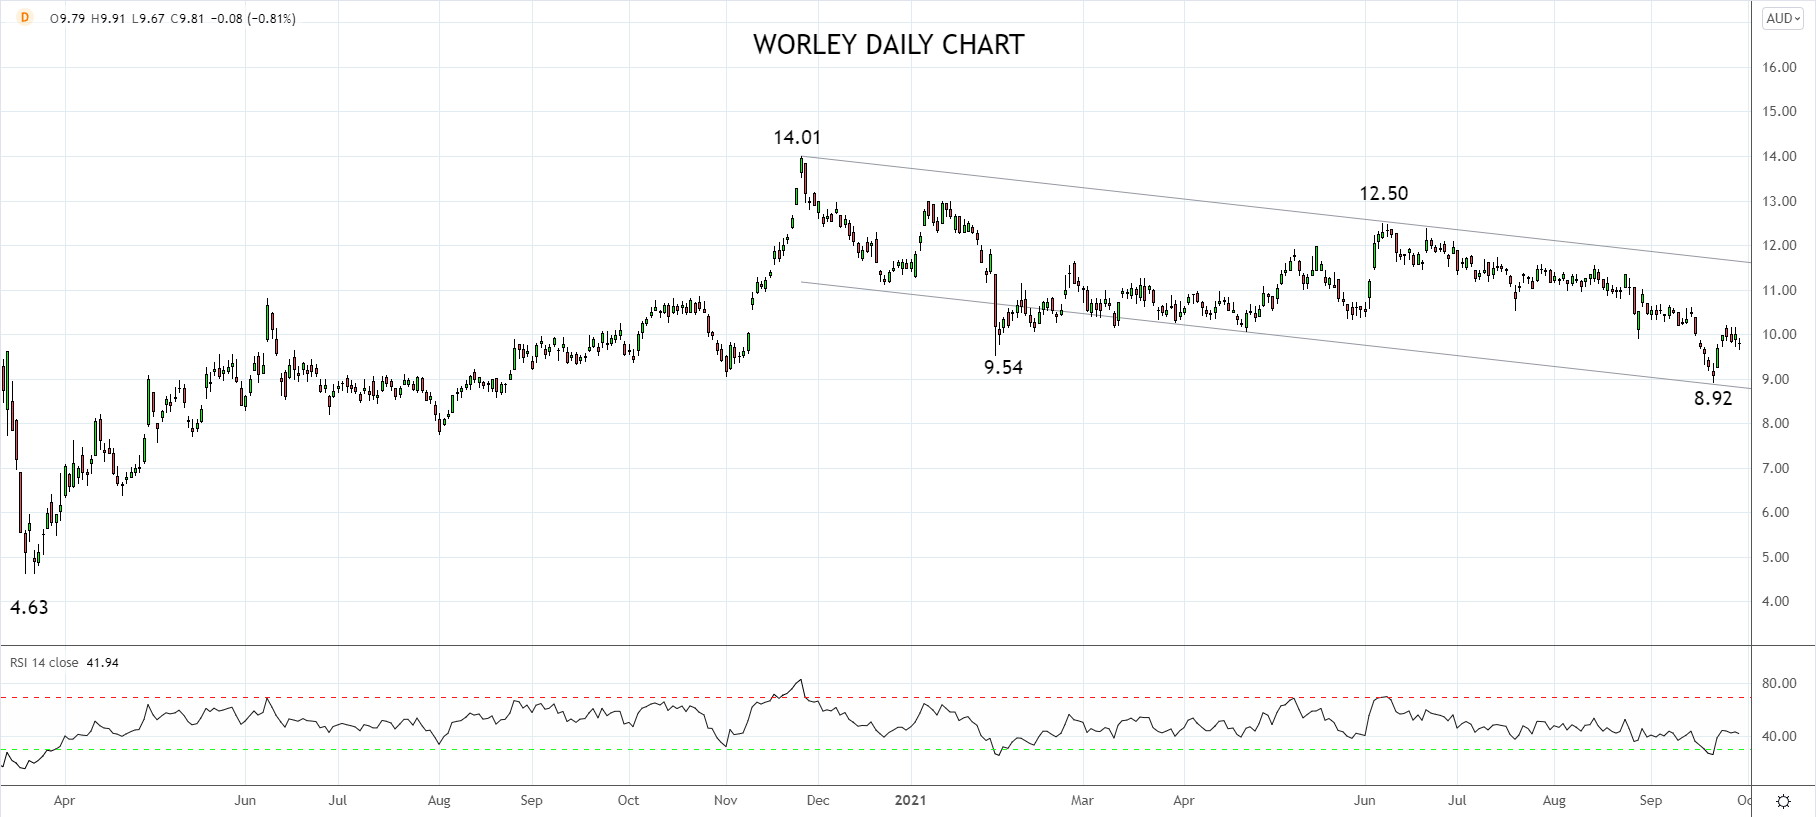 Worley Daily Chart